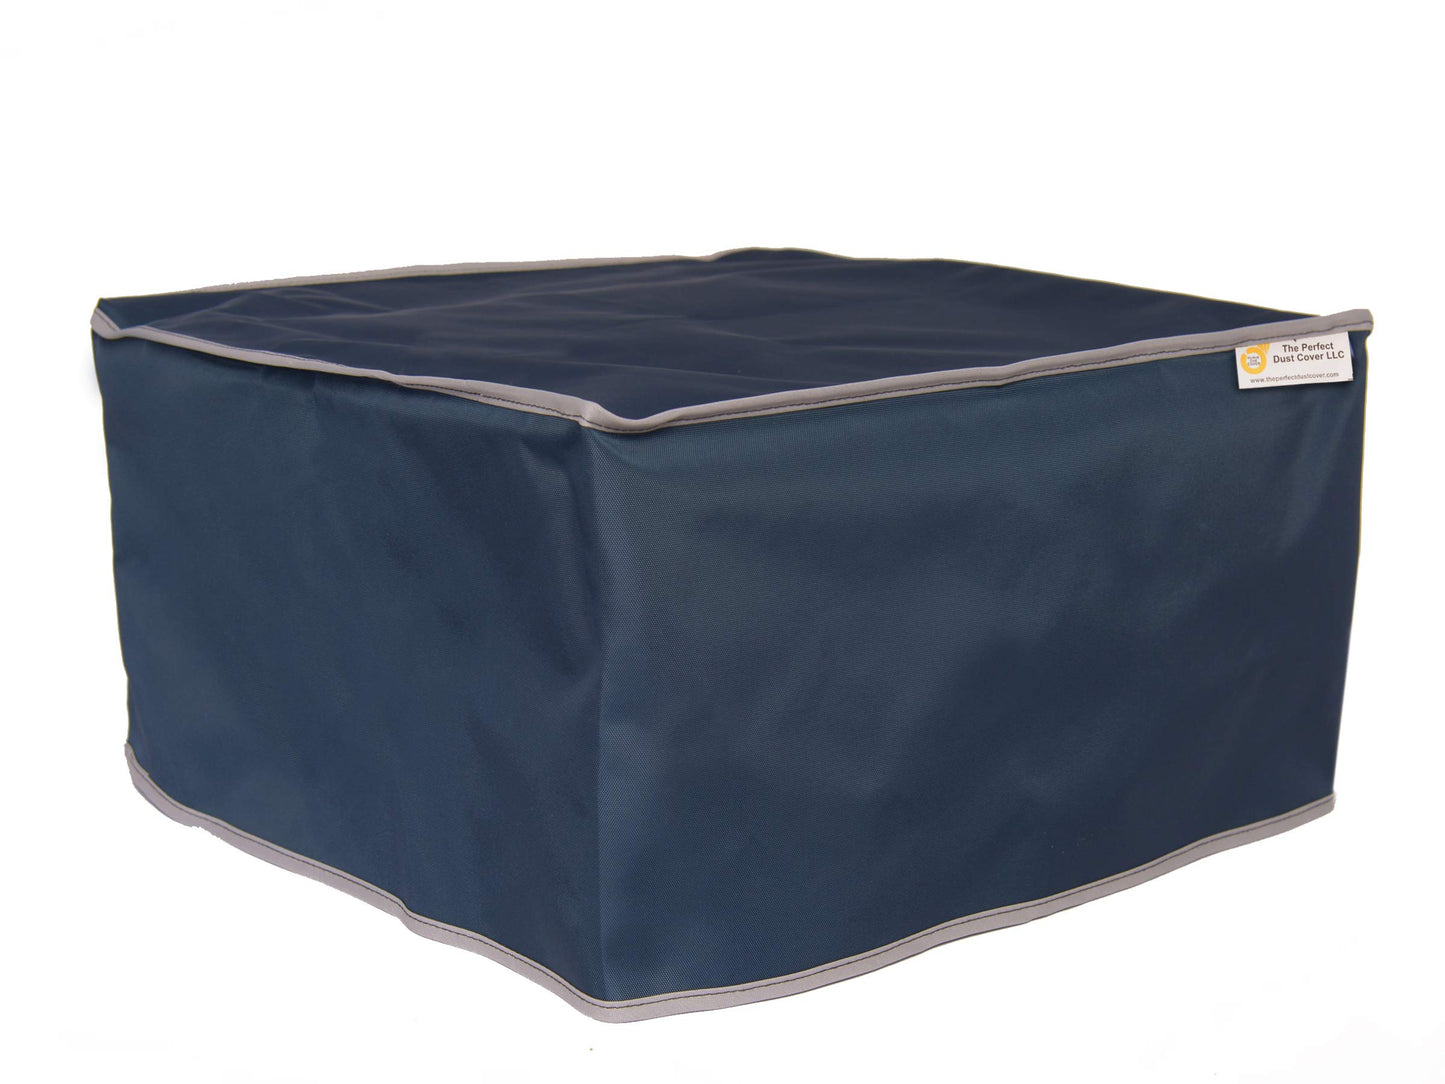 The Perfect Dust Cover, Navy Blue Nylon Cover for Brother MFC-J805DW INKvestment Tank All-in-One Printer, Anti Static Waterproof, Dimensions 17.1''W x 13.4''D x 7.7''H by The Perfect Dust Cover LLC